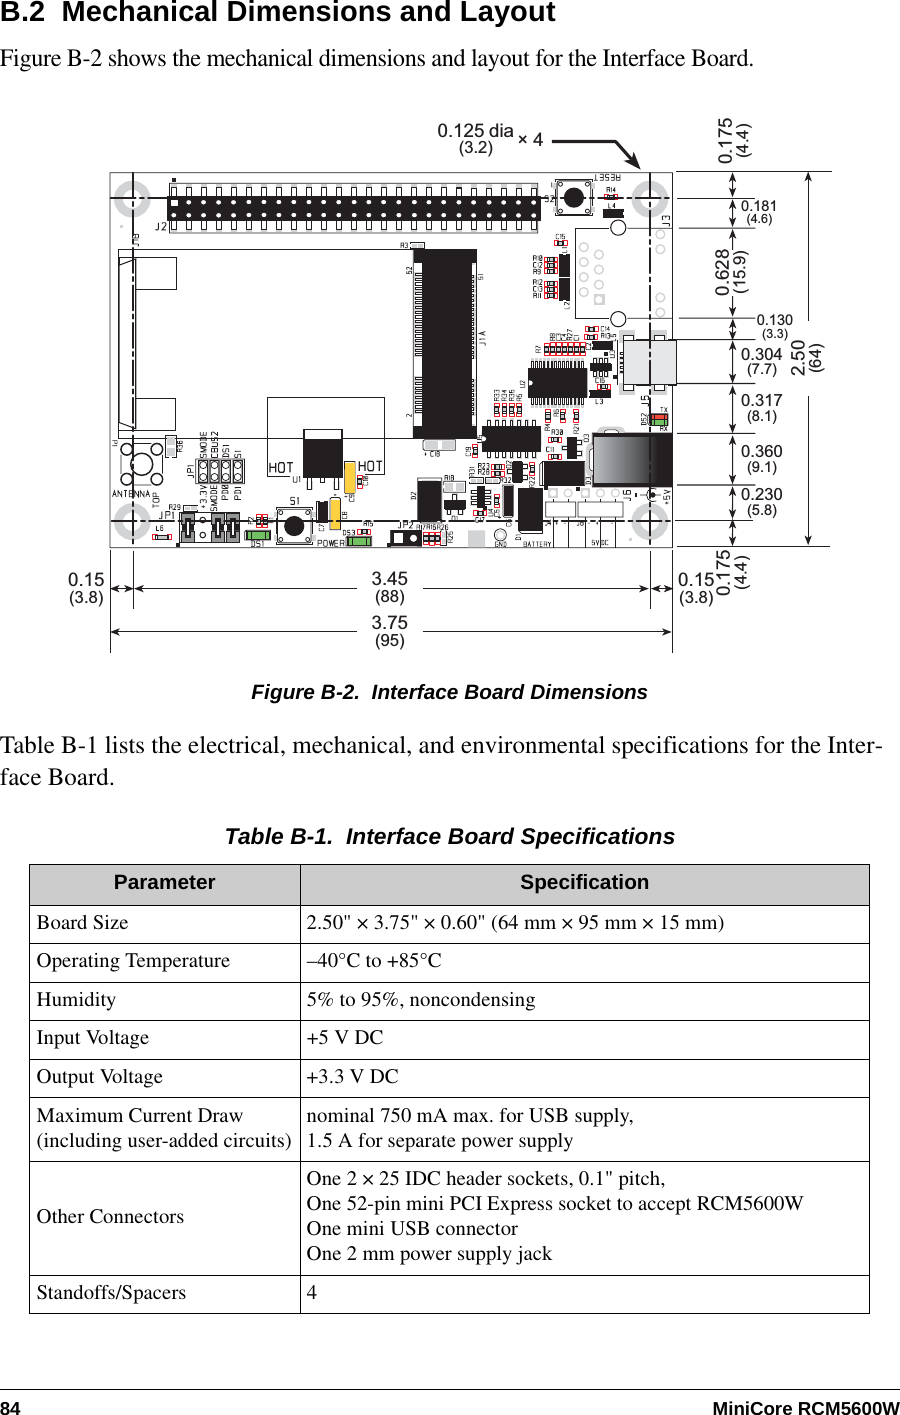 84 MiniCore RCM5600WB.2  Mechanical Dimensions and LayoutFigure B-2 shows the mechanical dimensions and layout for the Interface Board.Figure B-2.  Interface Board DimensionsTable B-1 lists the electrical, mechanical, and environmental specifications for the Inter-face Board.Table B-1.  Interface Board SpecificationsParameter SpecificationBoard Size 2.50&quot; × 3.75&quot; × 0.60&quot; (64 mm × 95 mm × 15 mm)Operating Temperature –40°C to +85°CHumidity 5% to 95%, noncondensingInput Voltage  +5 V DCOutput Voltage +3.3 V DCMaximum Current Draw(including user-added circuits) nominal 750 mA max. for USB supply,1.5 A for separate power supplyOther ConnectorsOne 2 × 25 IDC header sockets, 0.1&quot; pitch,One 52-pin mini PCI Express socket to accept RCM5600WOne mini USB connectorOne 2 mm power supply jackStandoffs/Spacers 40.15(3.8)0.15(3.8)0.175(4.4)3.45(88)3.75(95)2.50(64)0.175(4.4)0.181(4.6)0.628(15.9)0.230(5.8)0.360(9.1)0.317(8.1)0.304(7.7)0.130(3.3)× 40.125 dia(3.2)